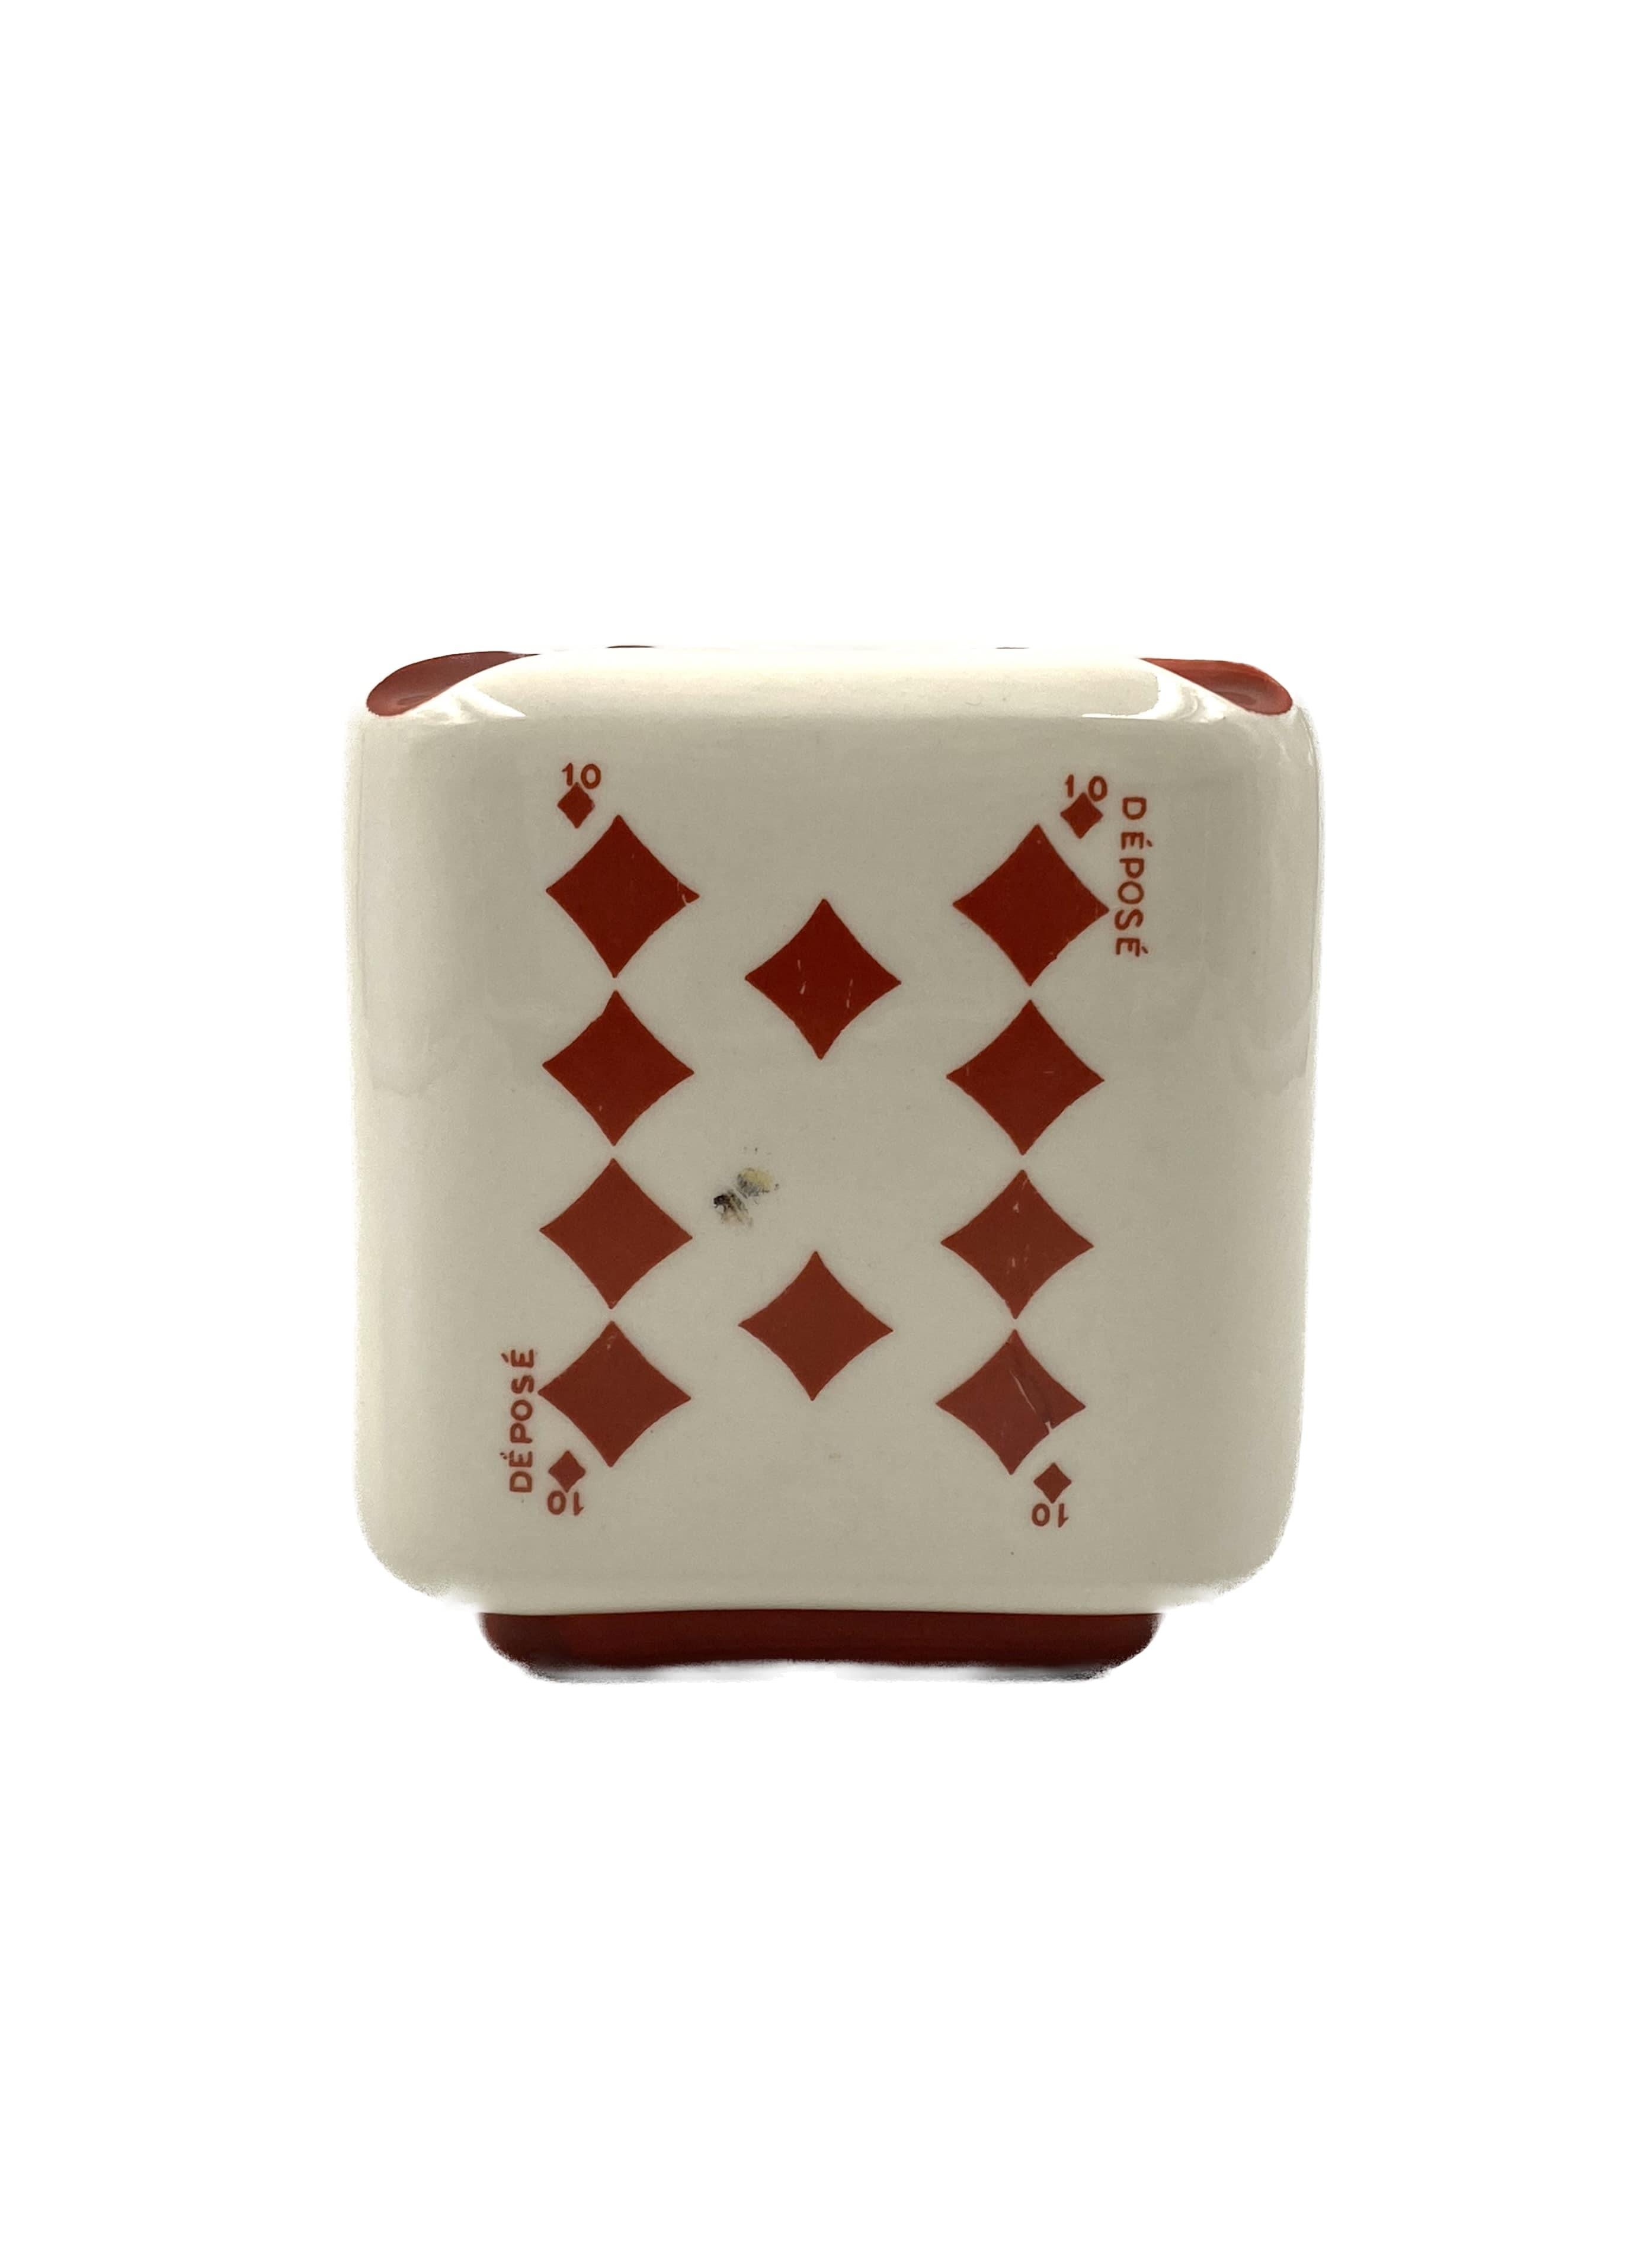 Mid-20th Century Brugerolle Aigle Rouge Napoleon Cognac Cubic Ceramic Ashtray, France 1950s For Sale